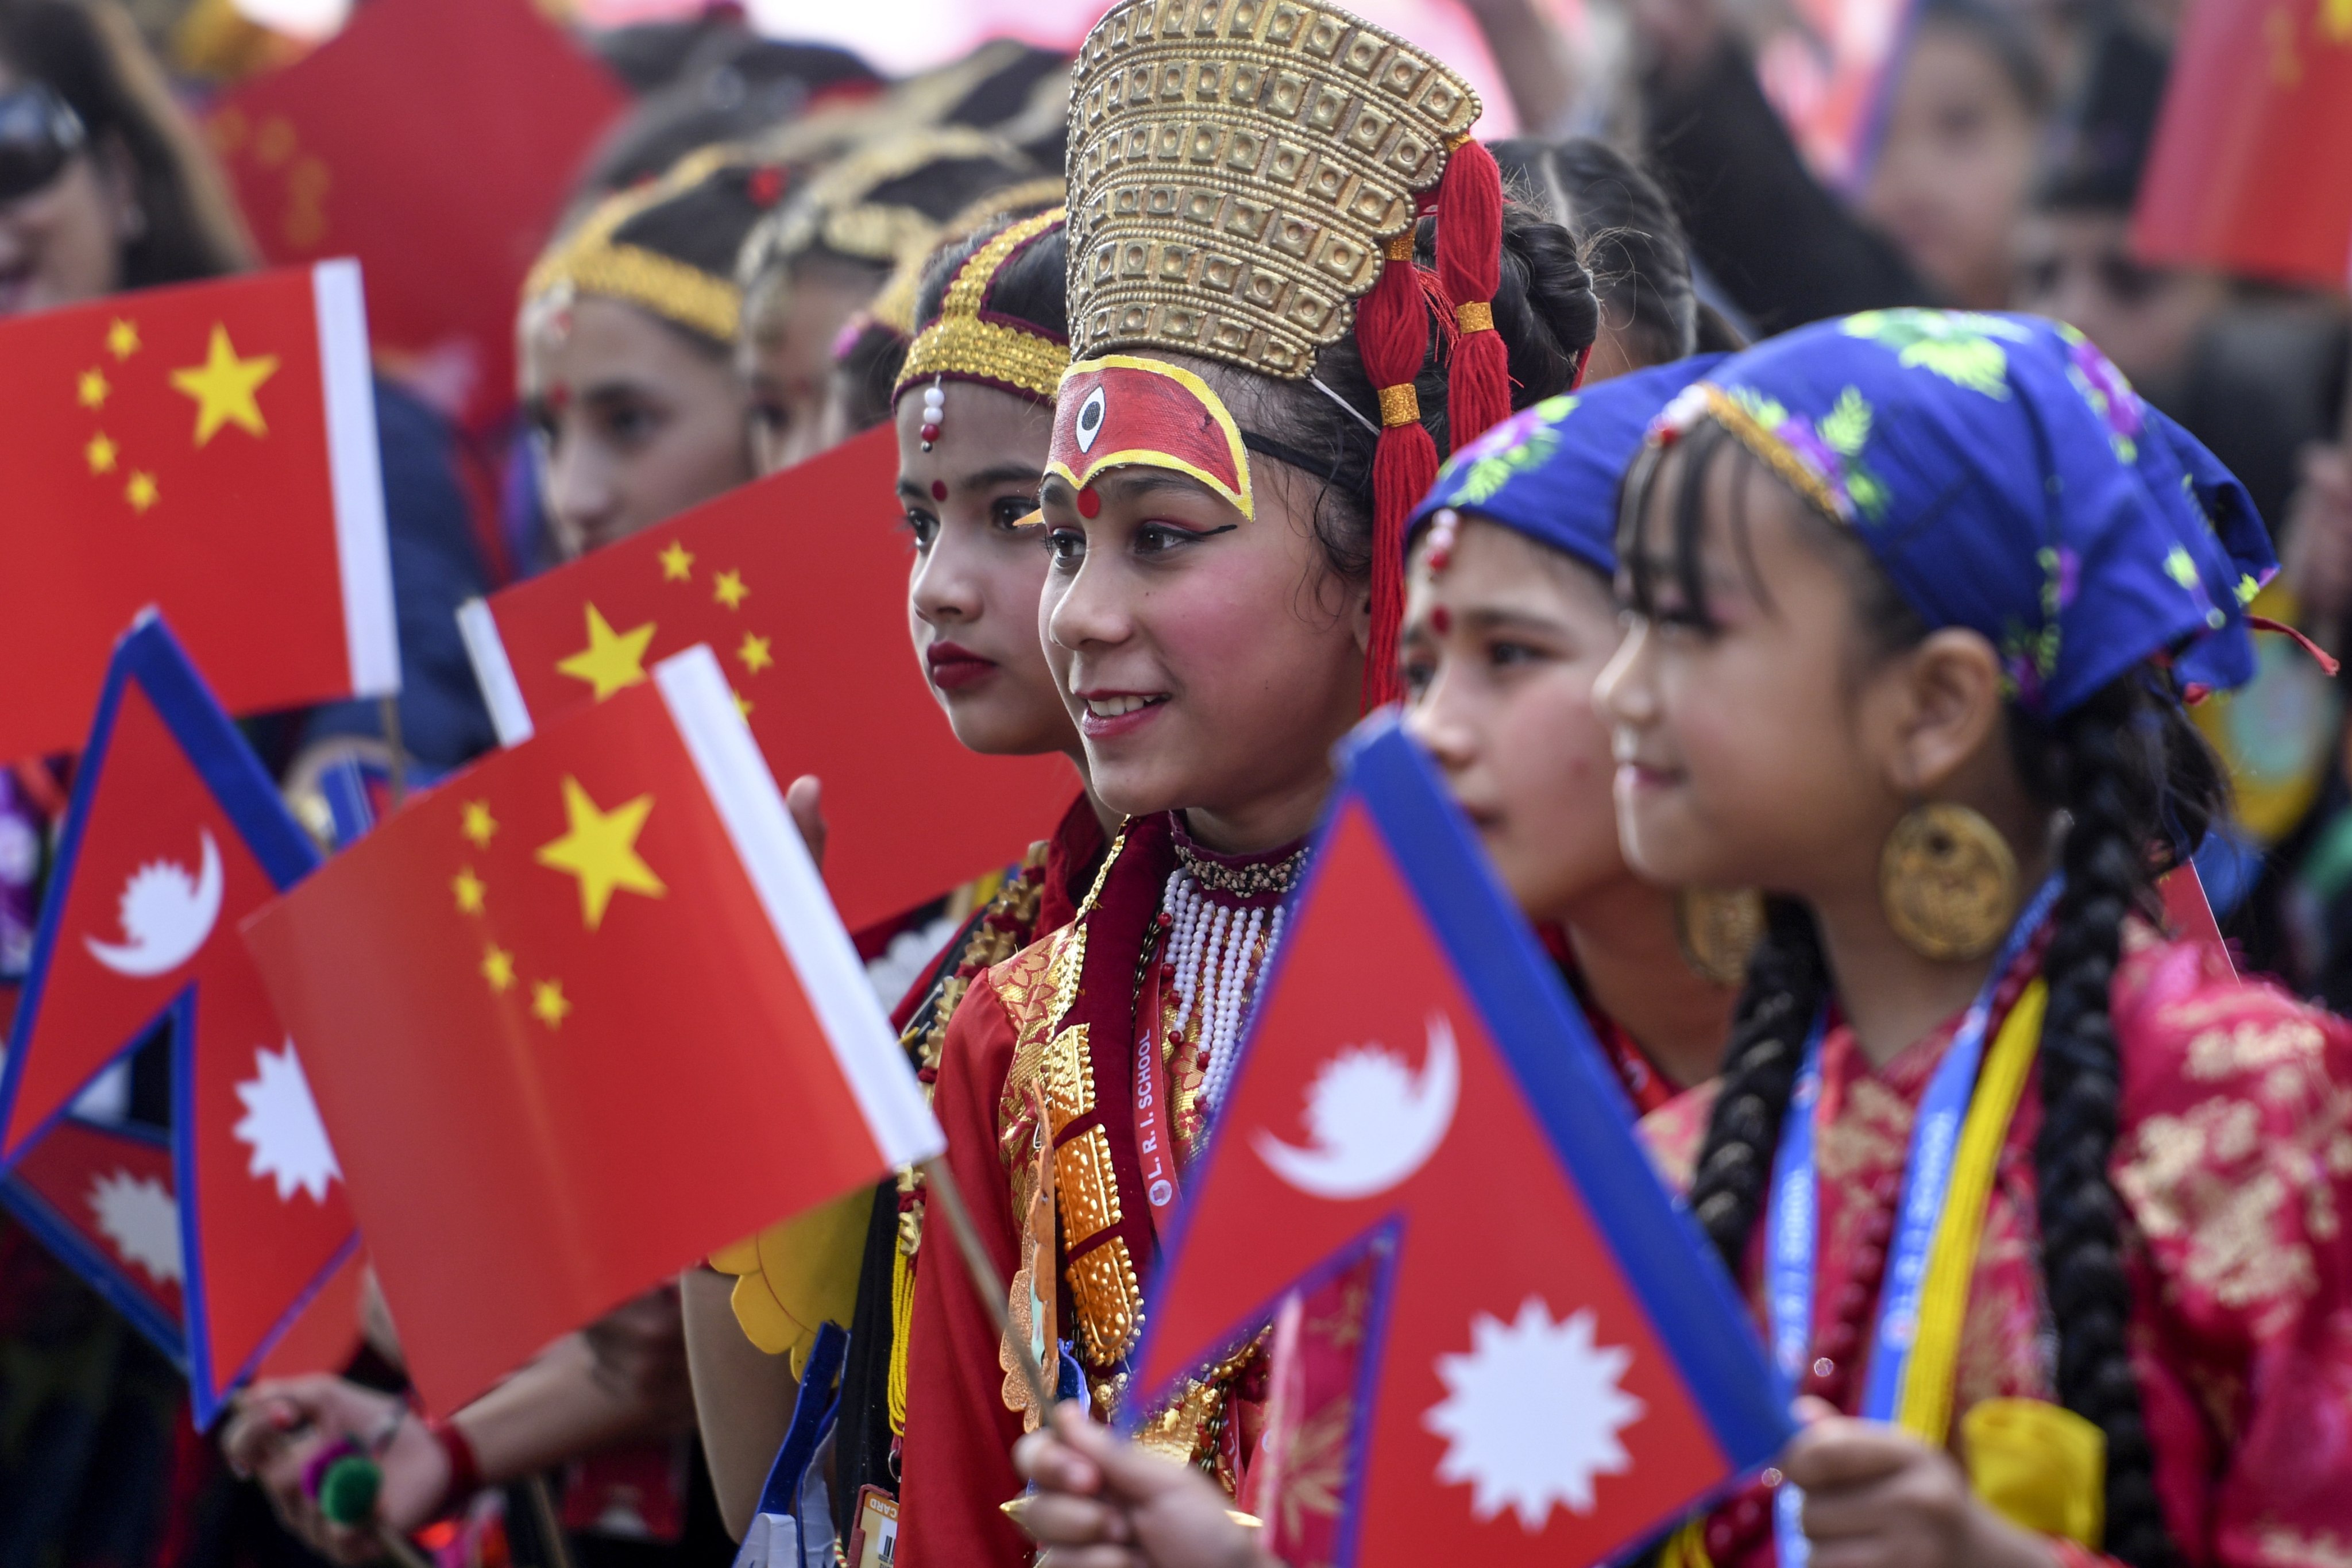 Nepali children wearing traditional clothes at Tribhuvan International Airport bid farewell to China’s President Xi Jinping after his two-day visit in 2019. Photo: EPA